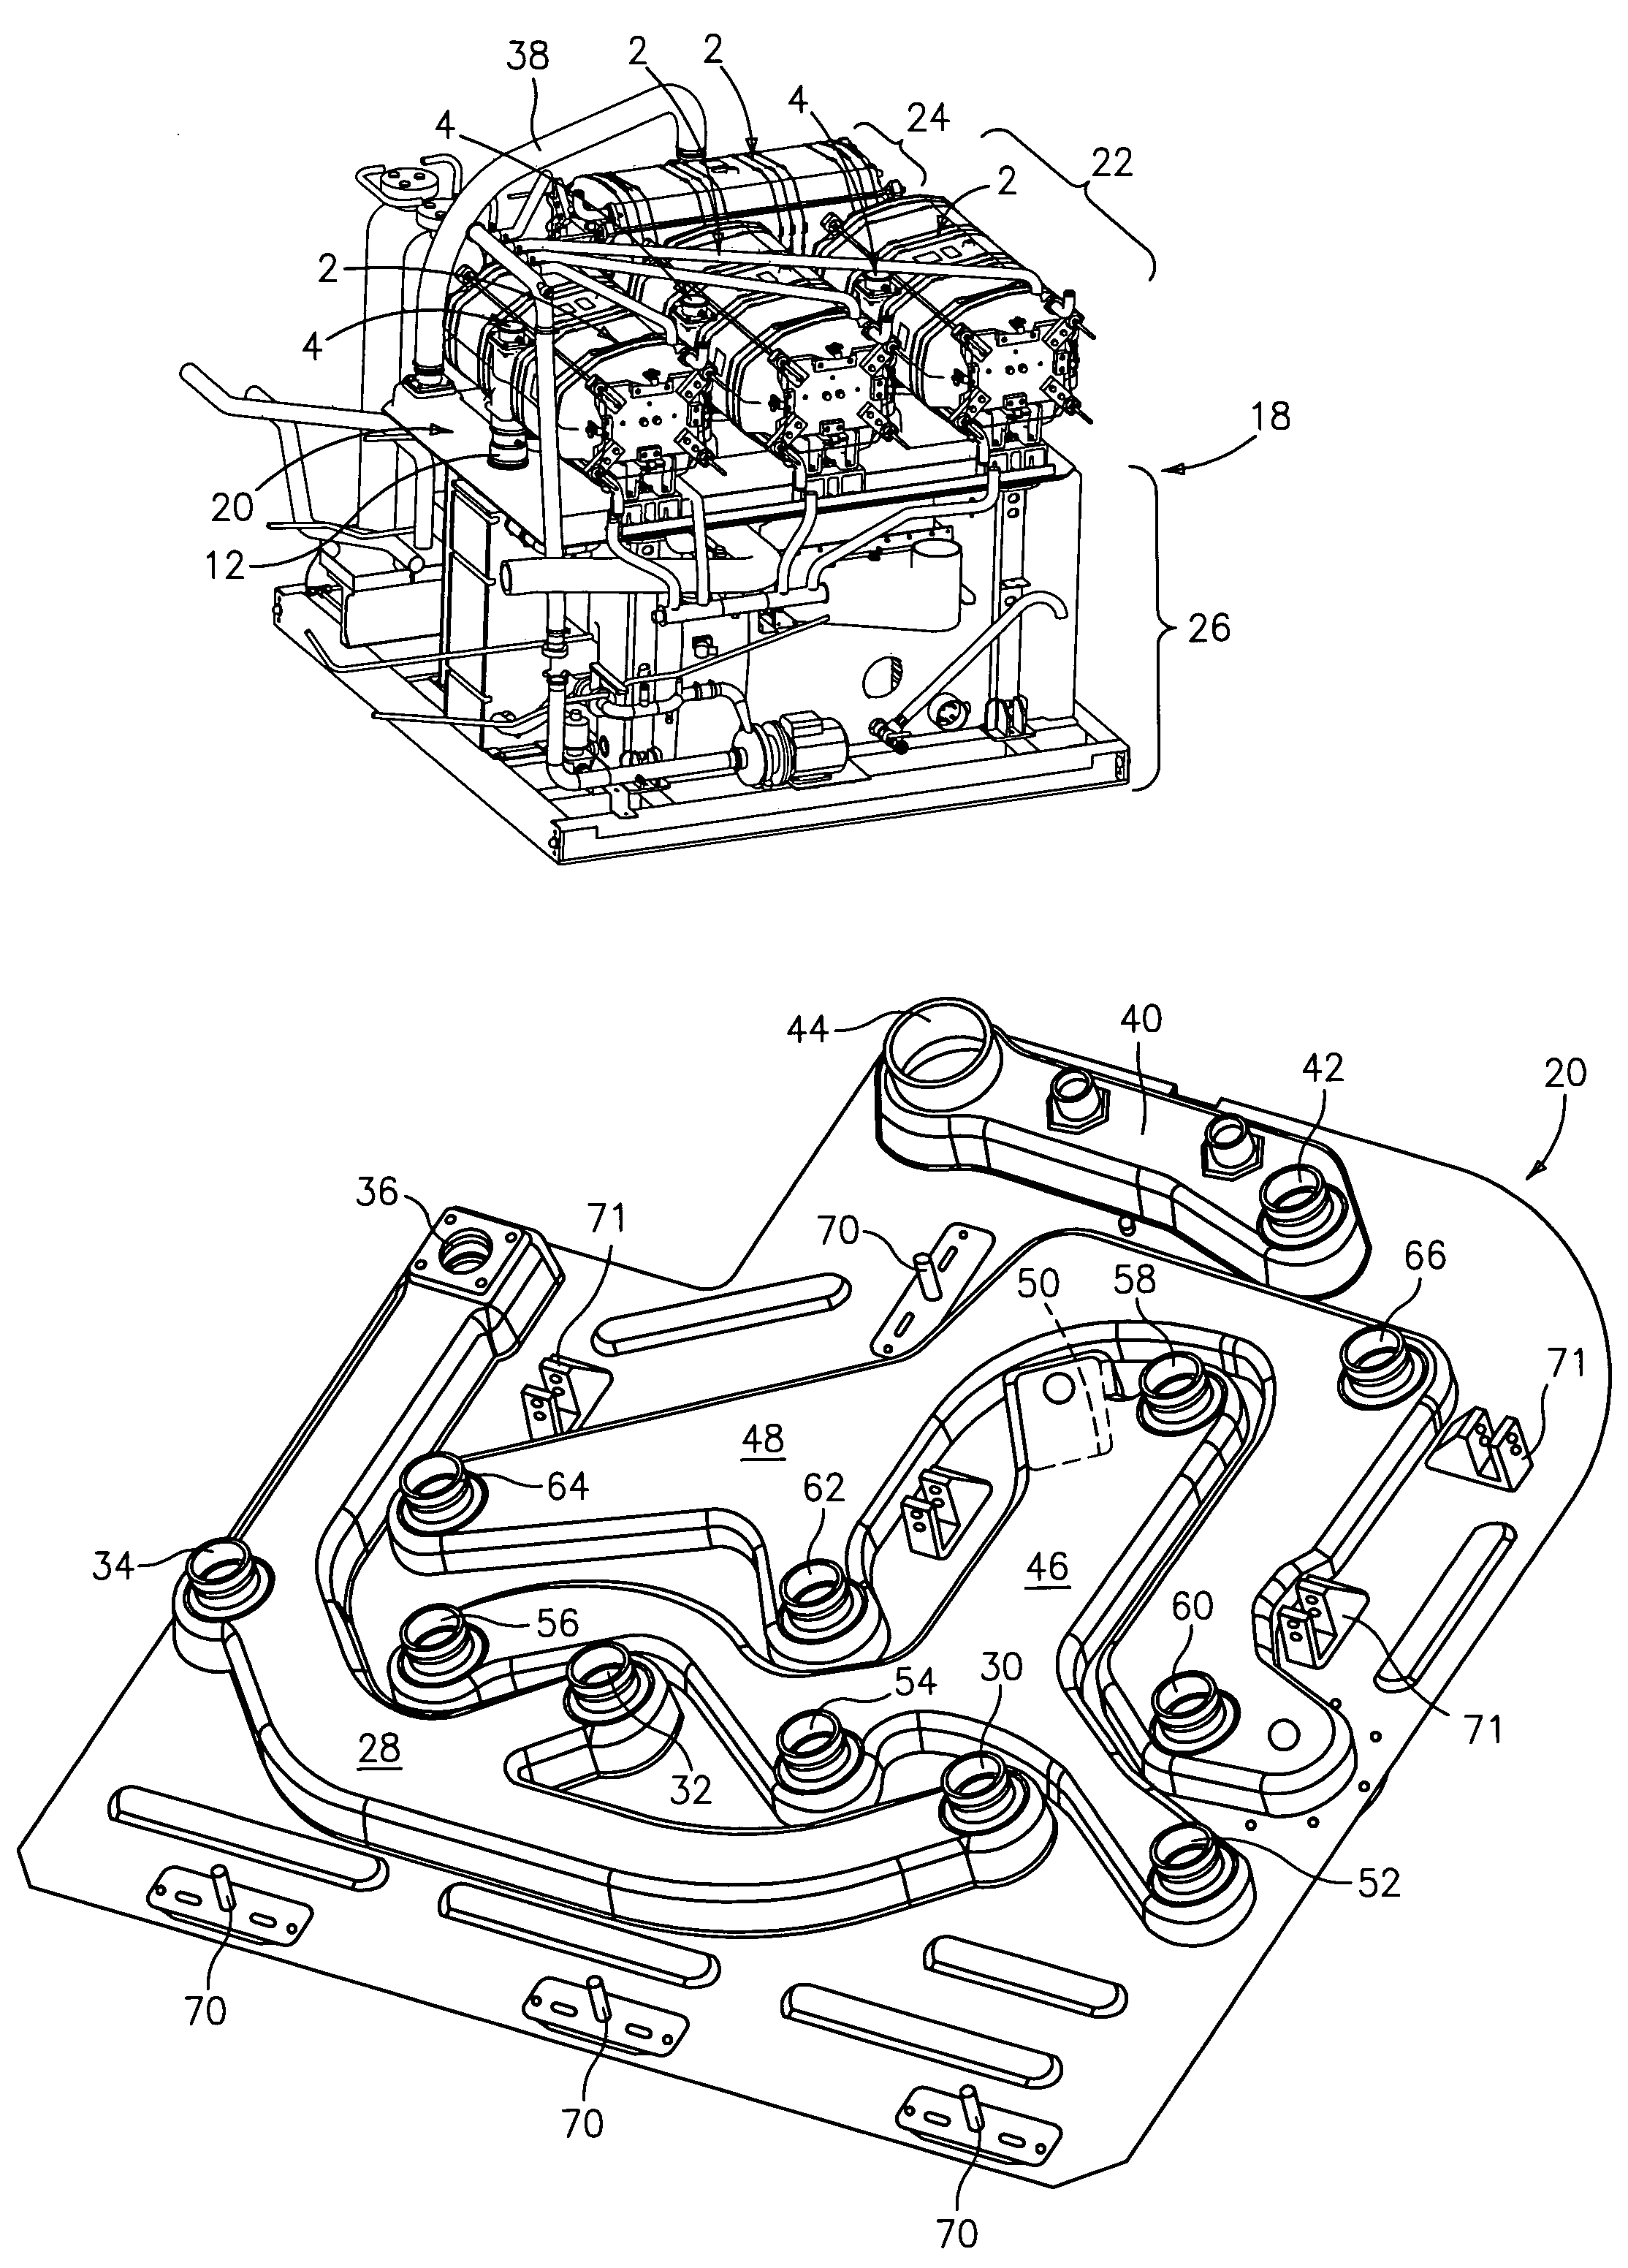 Fuel and air flow control in a multi-stack fuel cell power plant